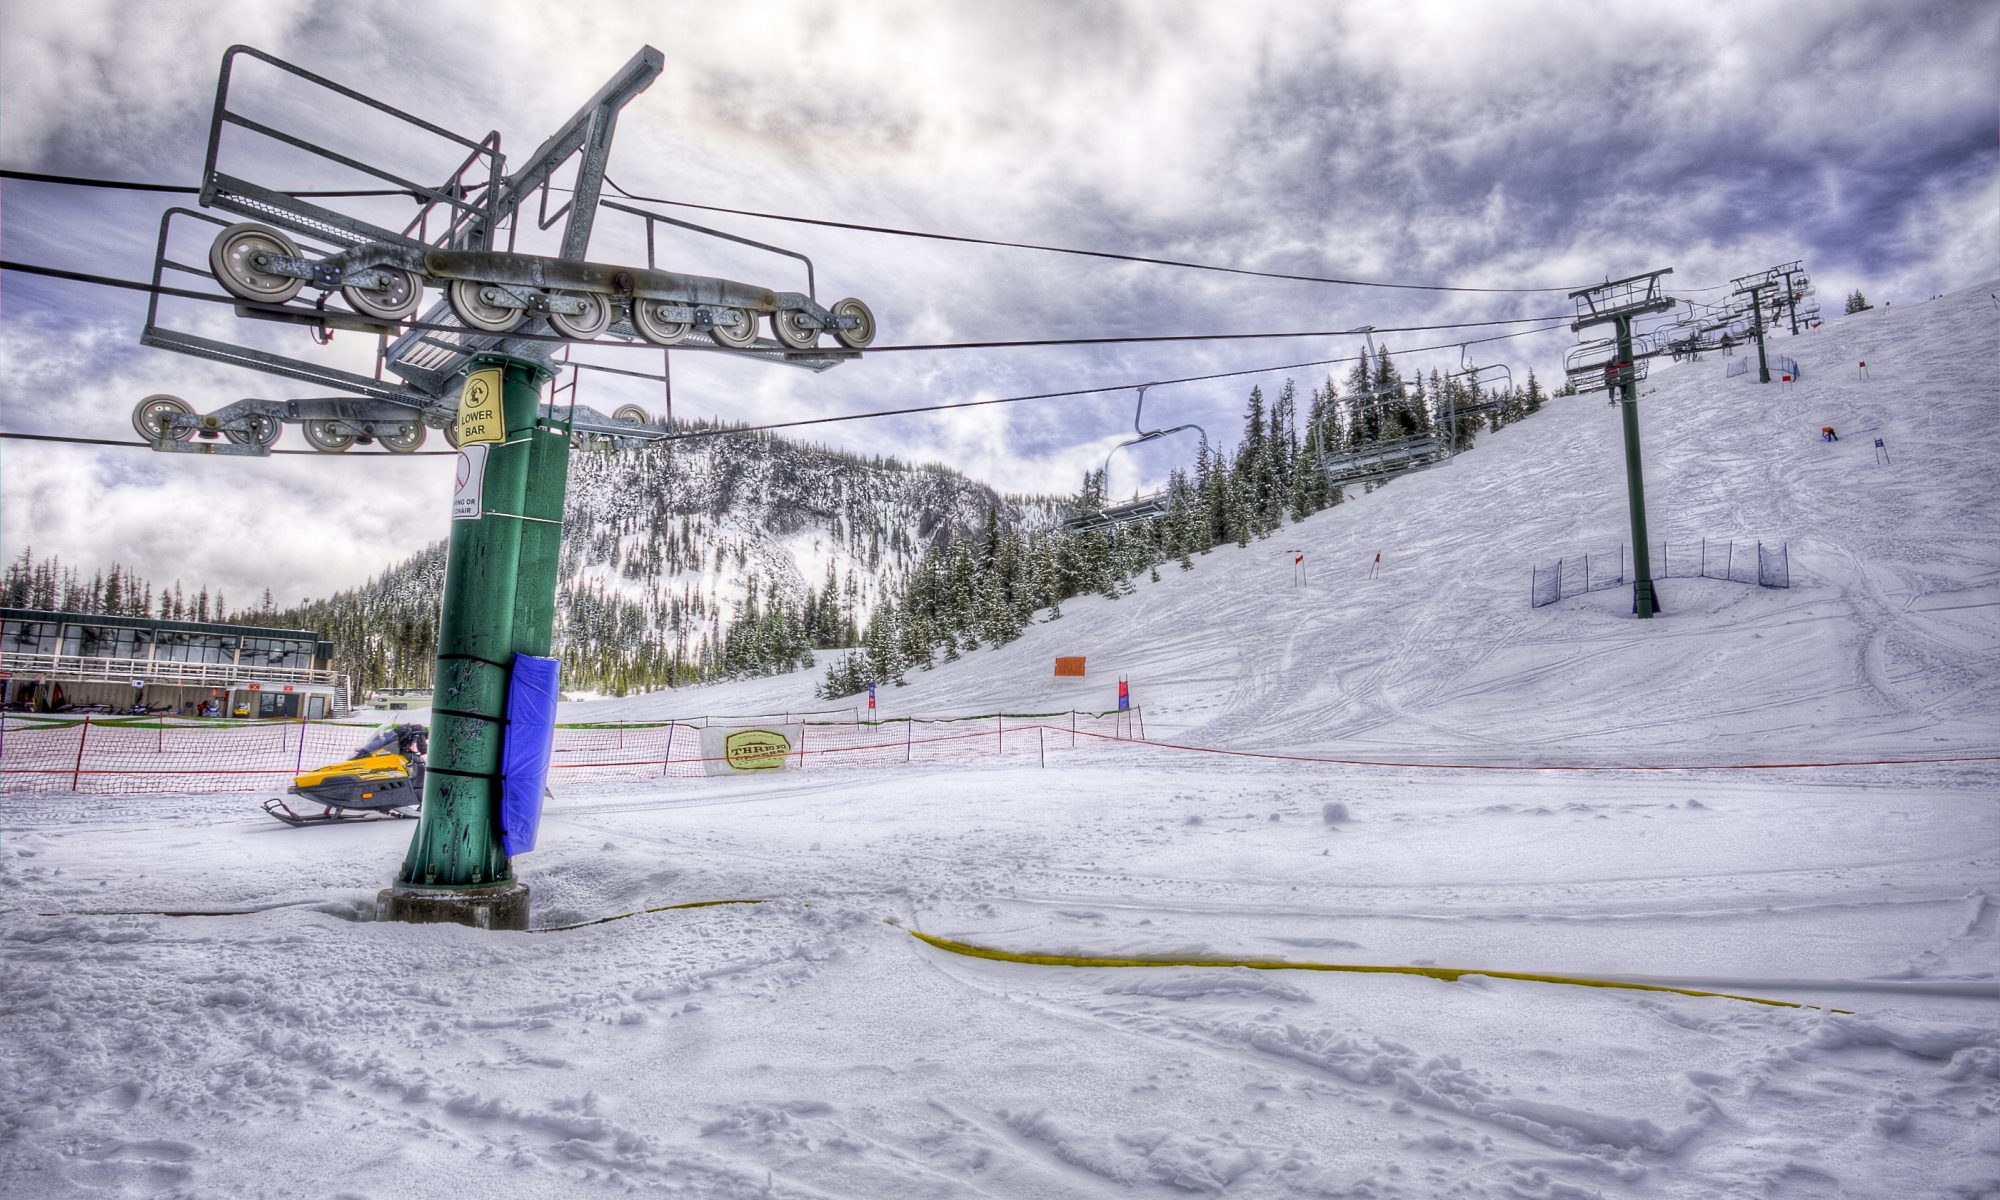 Indy Pass - Hoodoo Ski Area in Central Oregon. The Indy Pass will get you skiing for just USD 199 at North America’s authentic independent resorts.